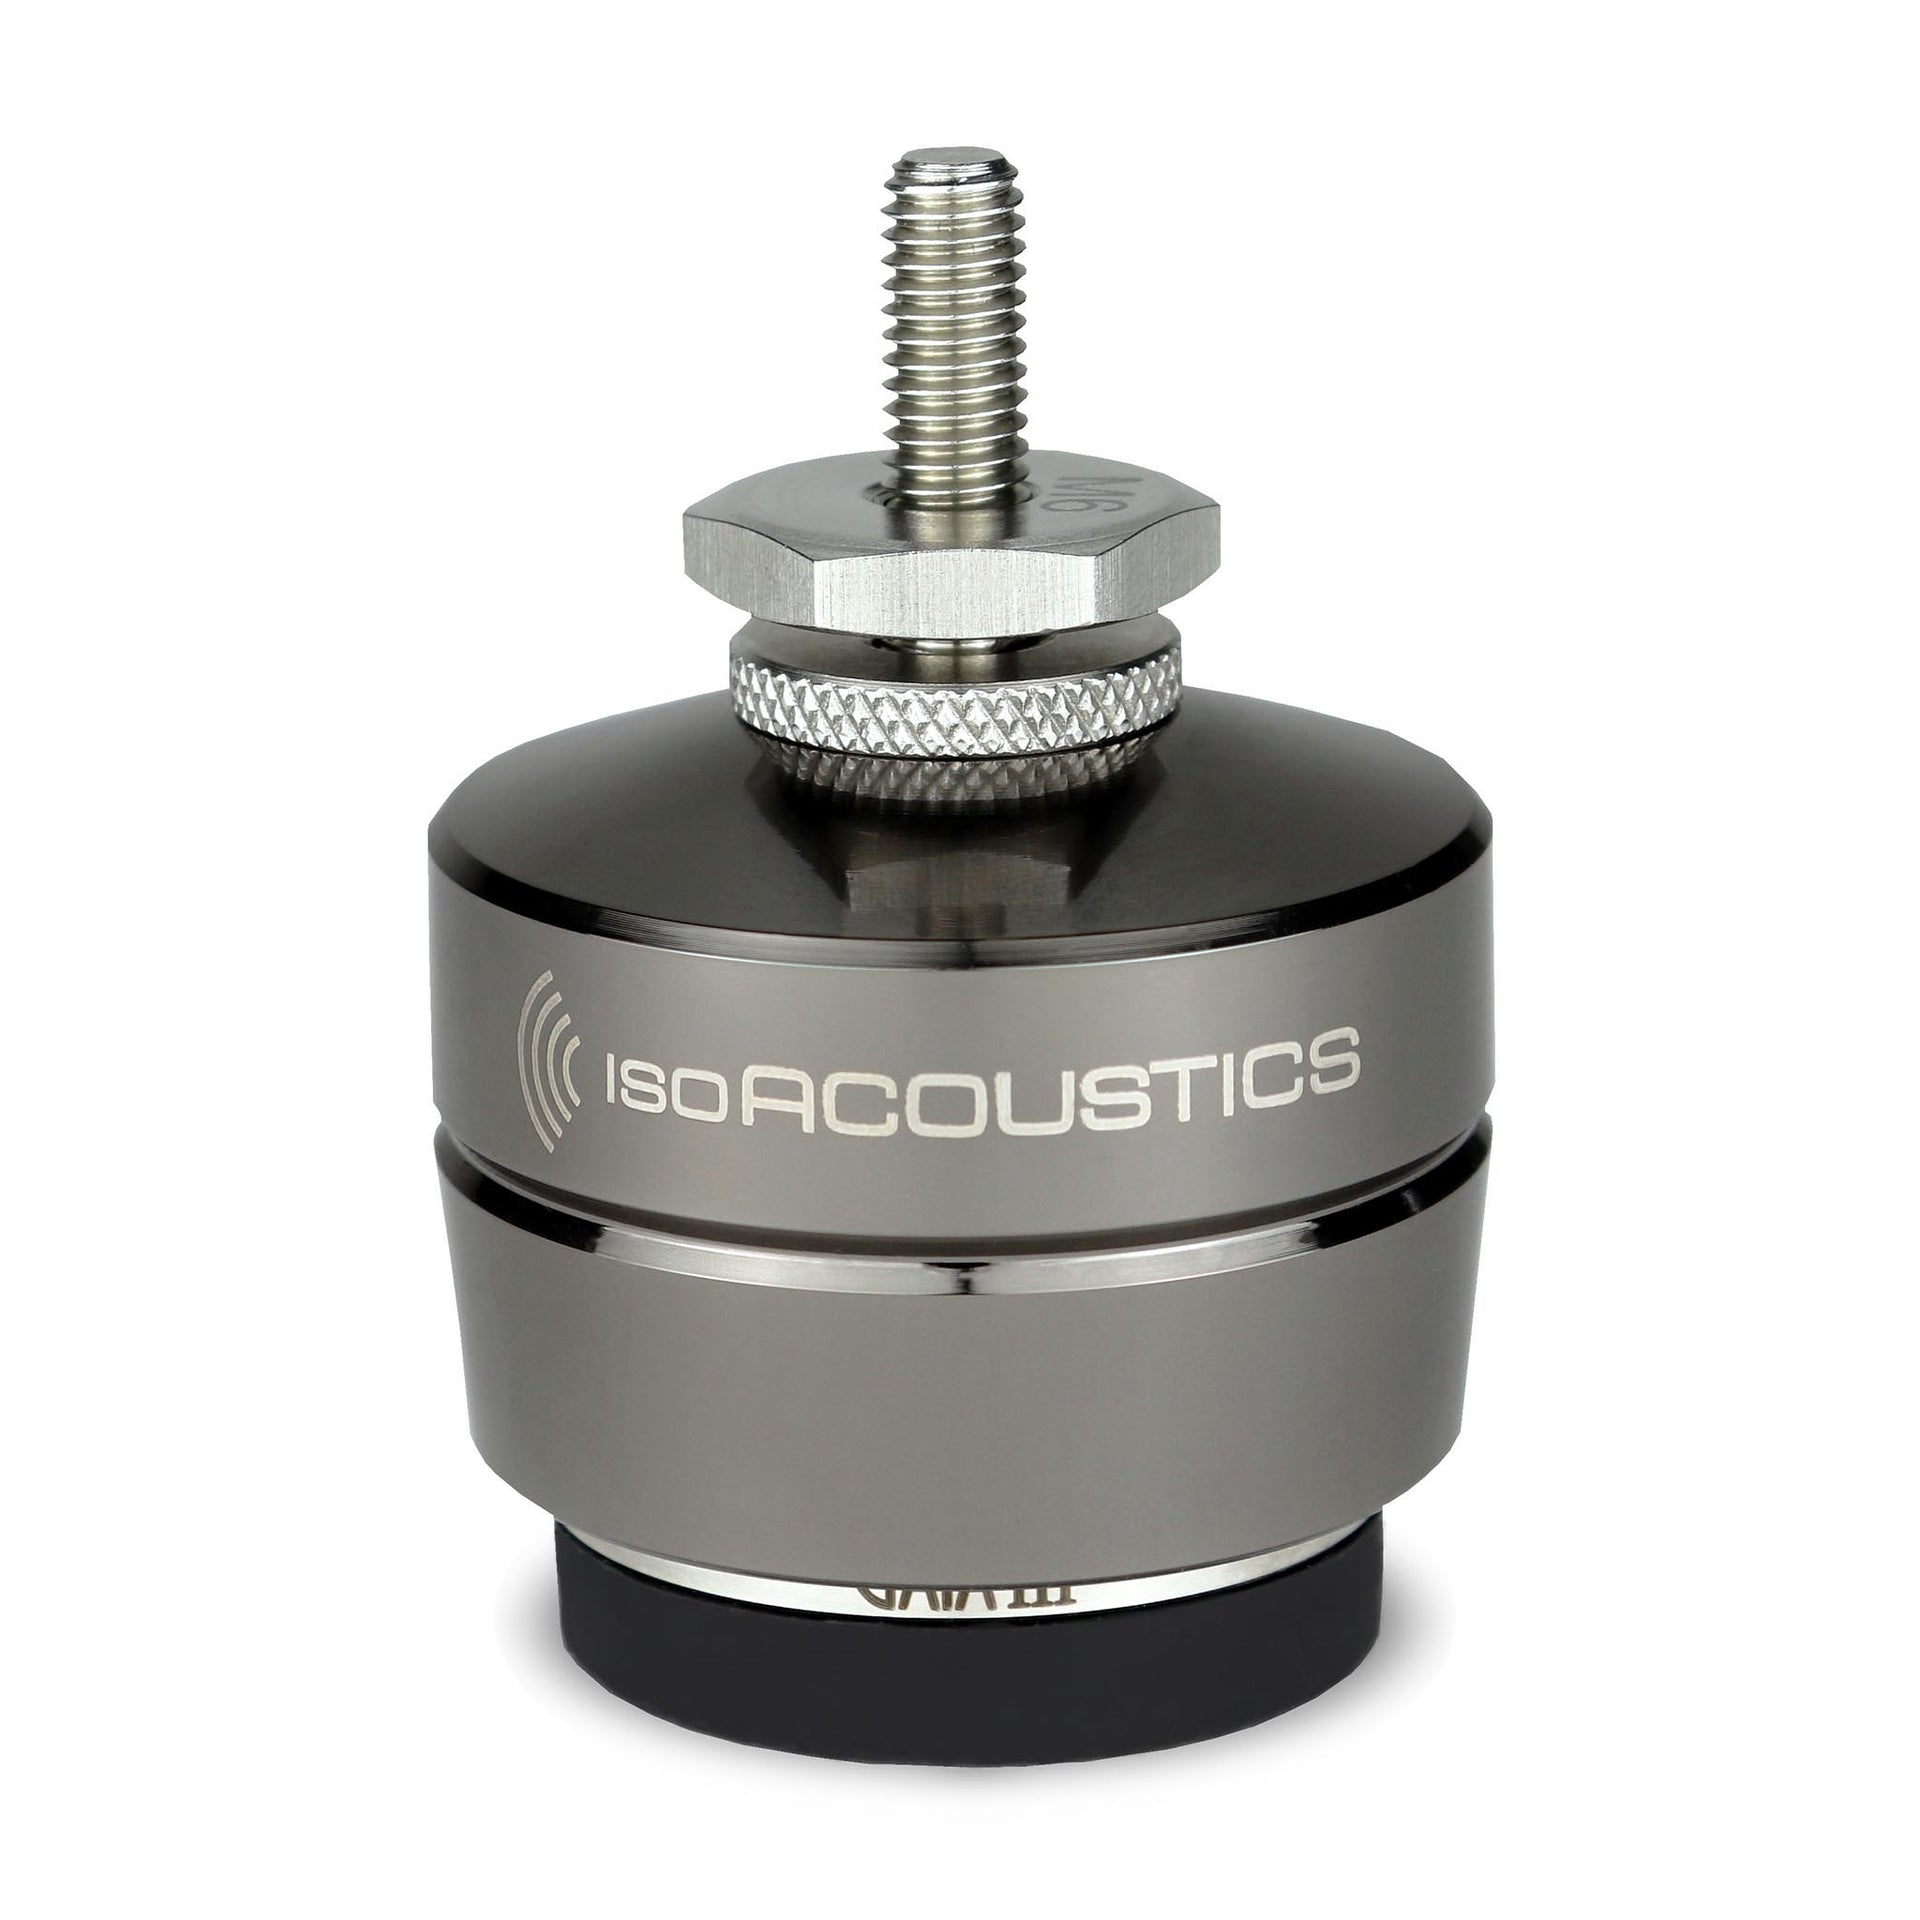 IsoAcoustics: Speaker Stands, Isolation Feet, and Isolation Platforms